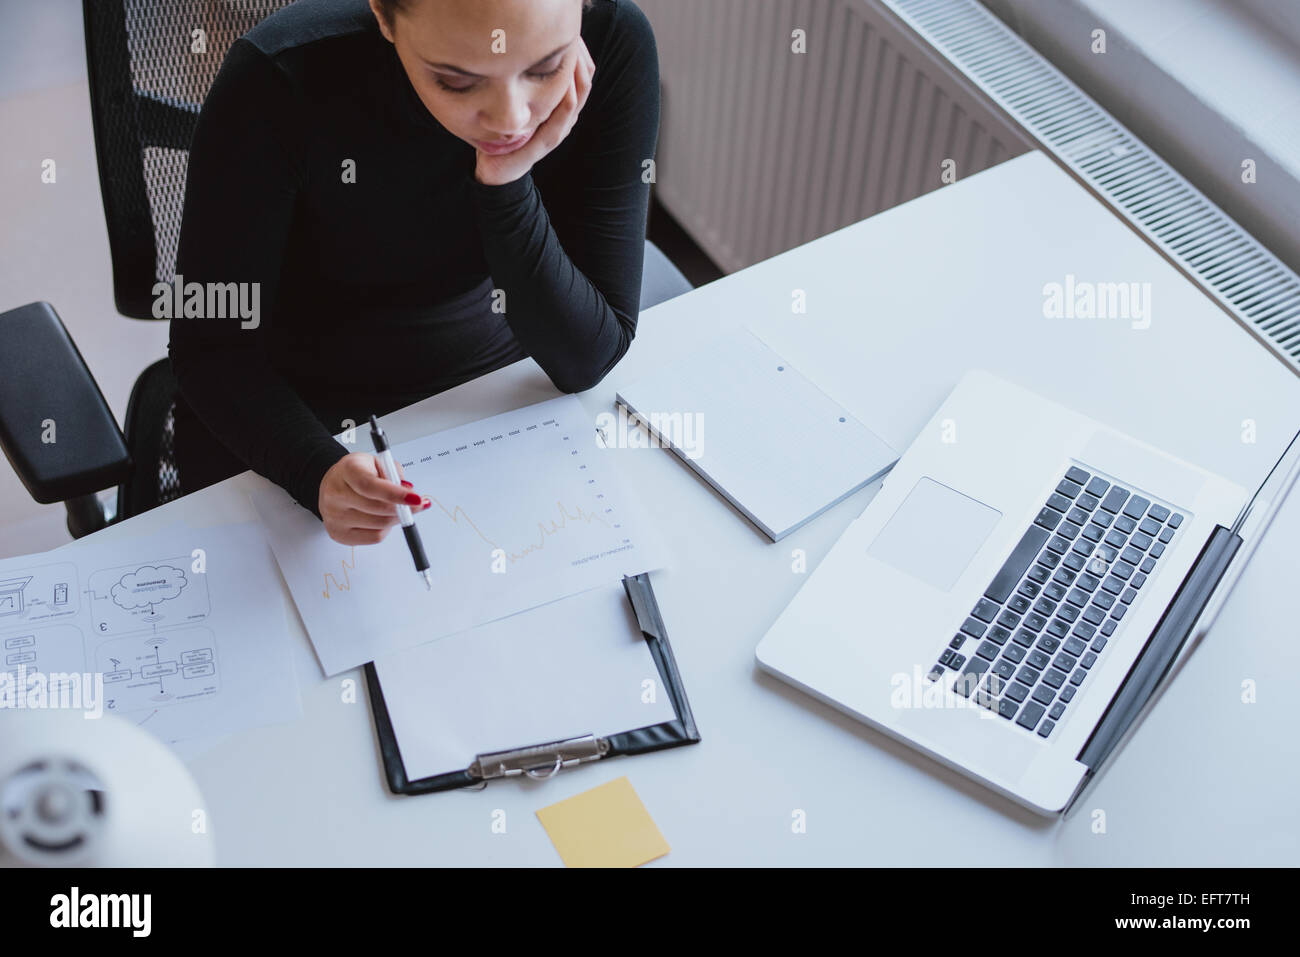 Top view of woman analyzing business growth on a chart while sitting at her desk in office. Stock Photo